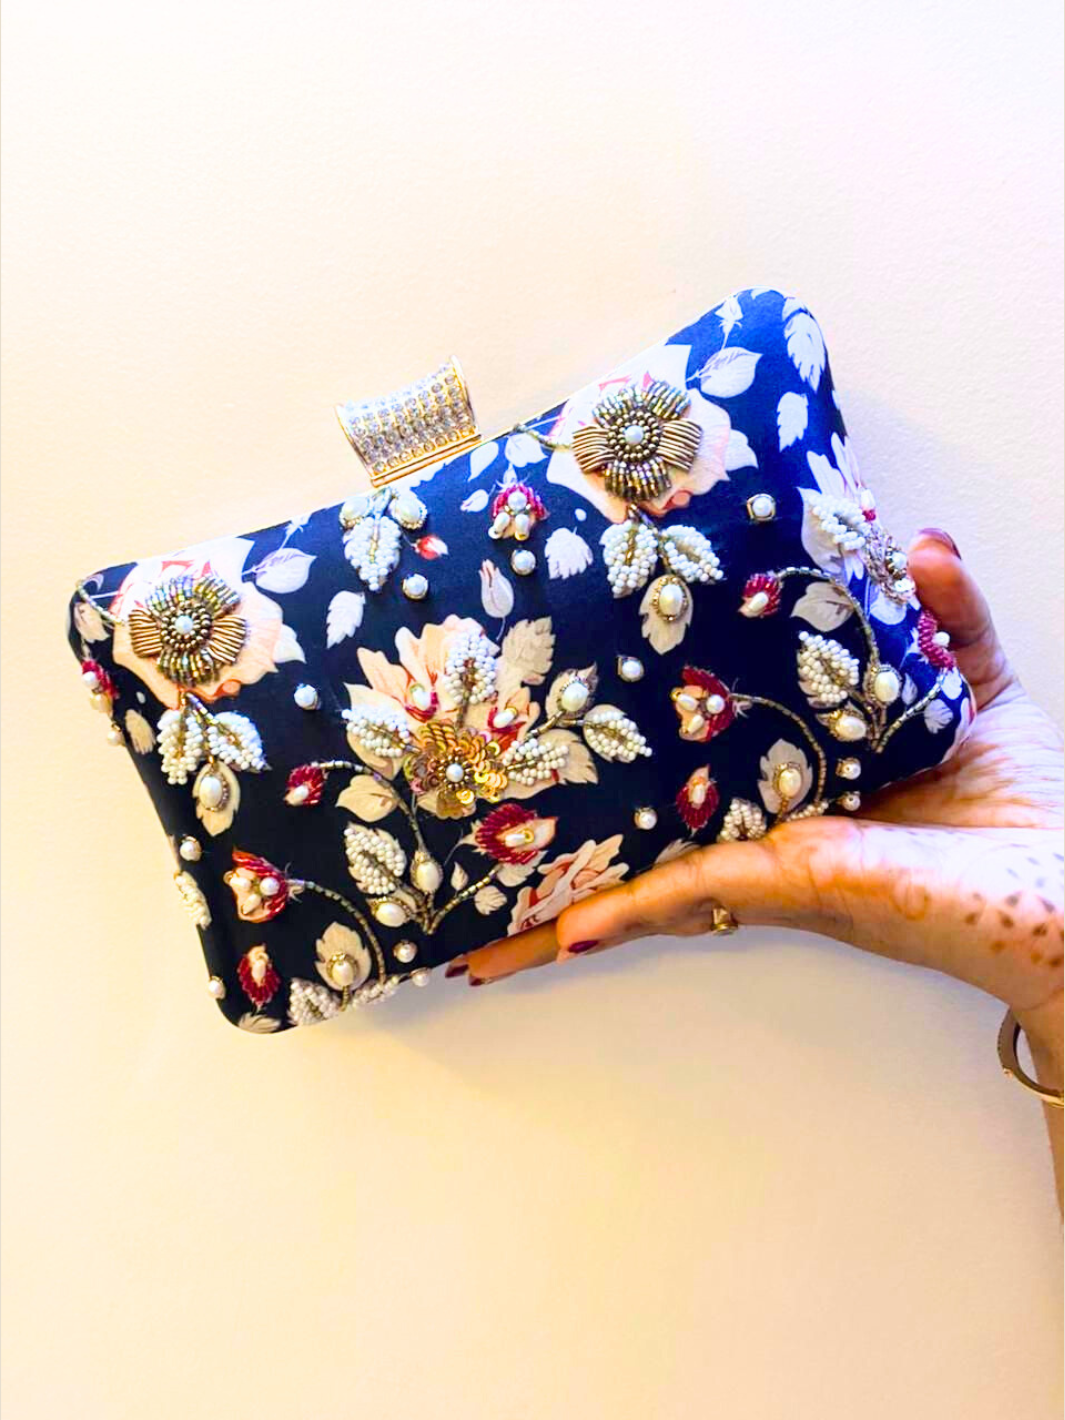 Embroidered blue clutch bag